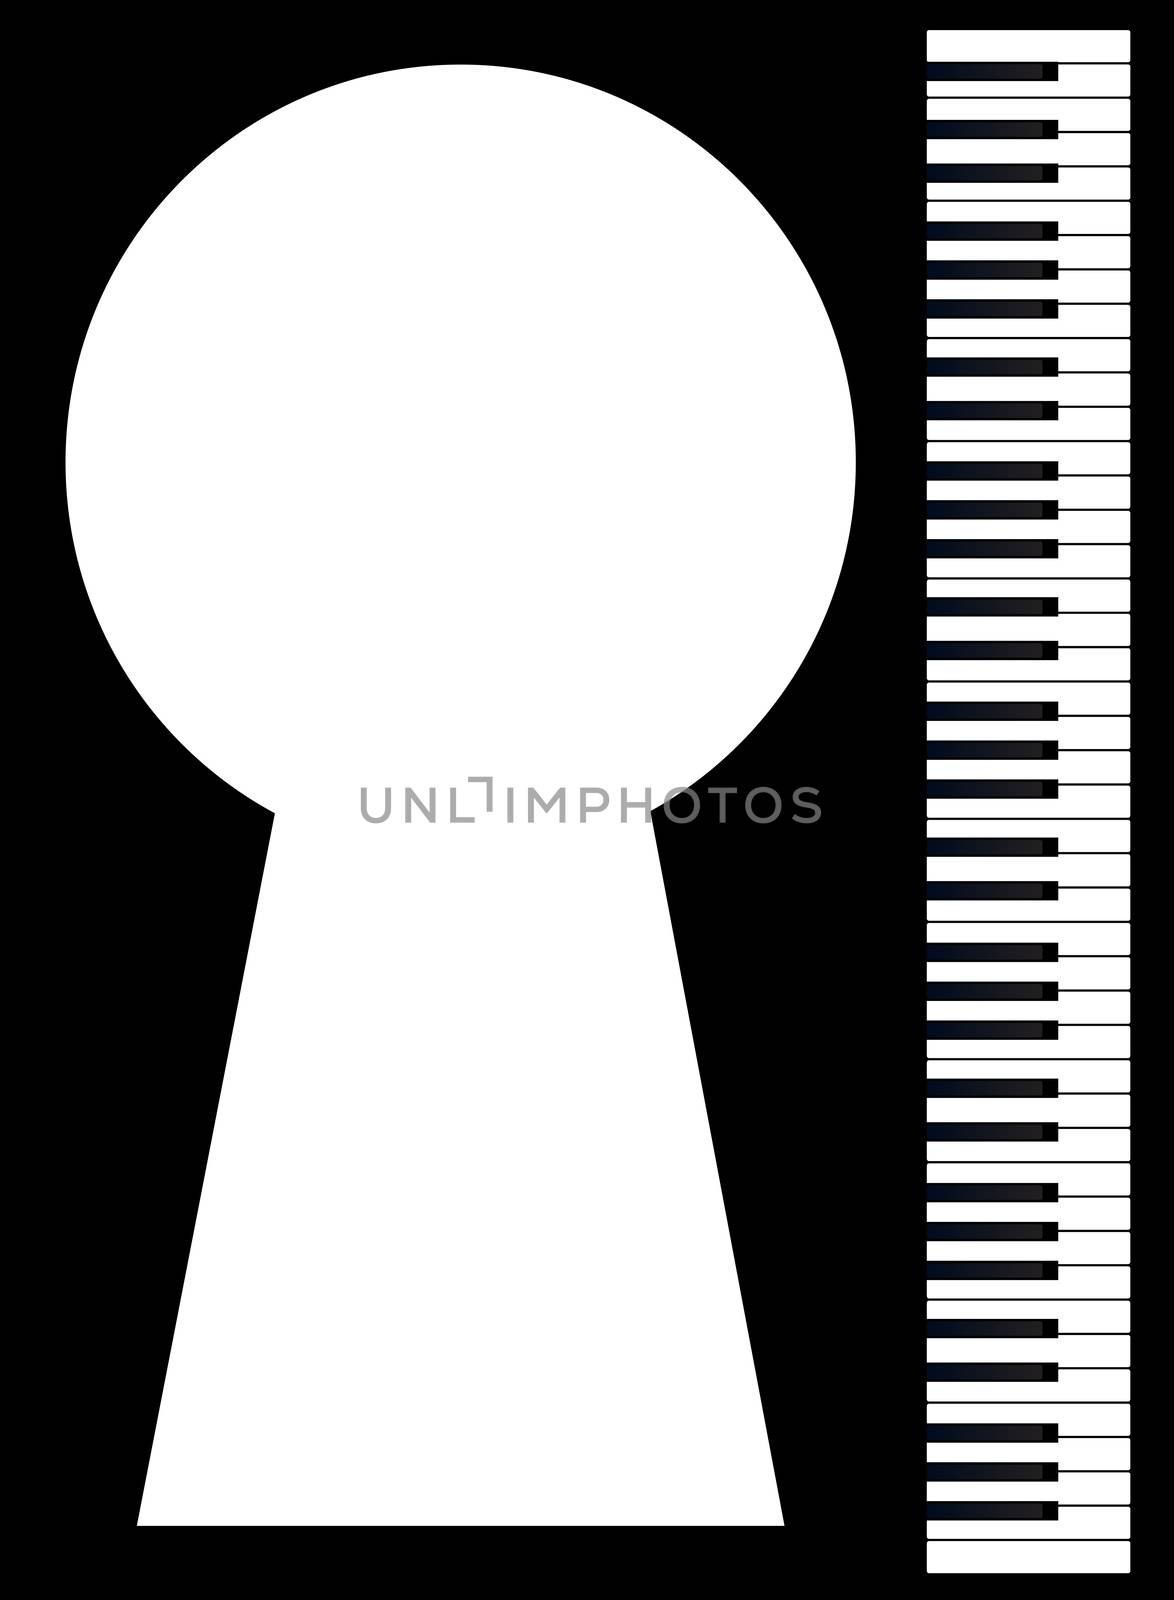 Black and white piano keys set against a black background with a large keyhole for copy